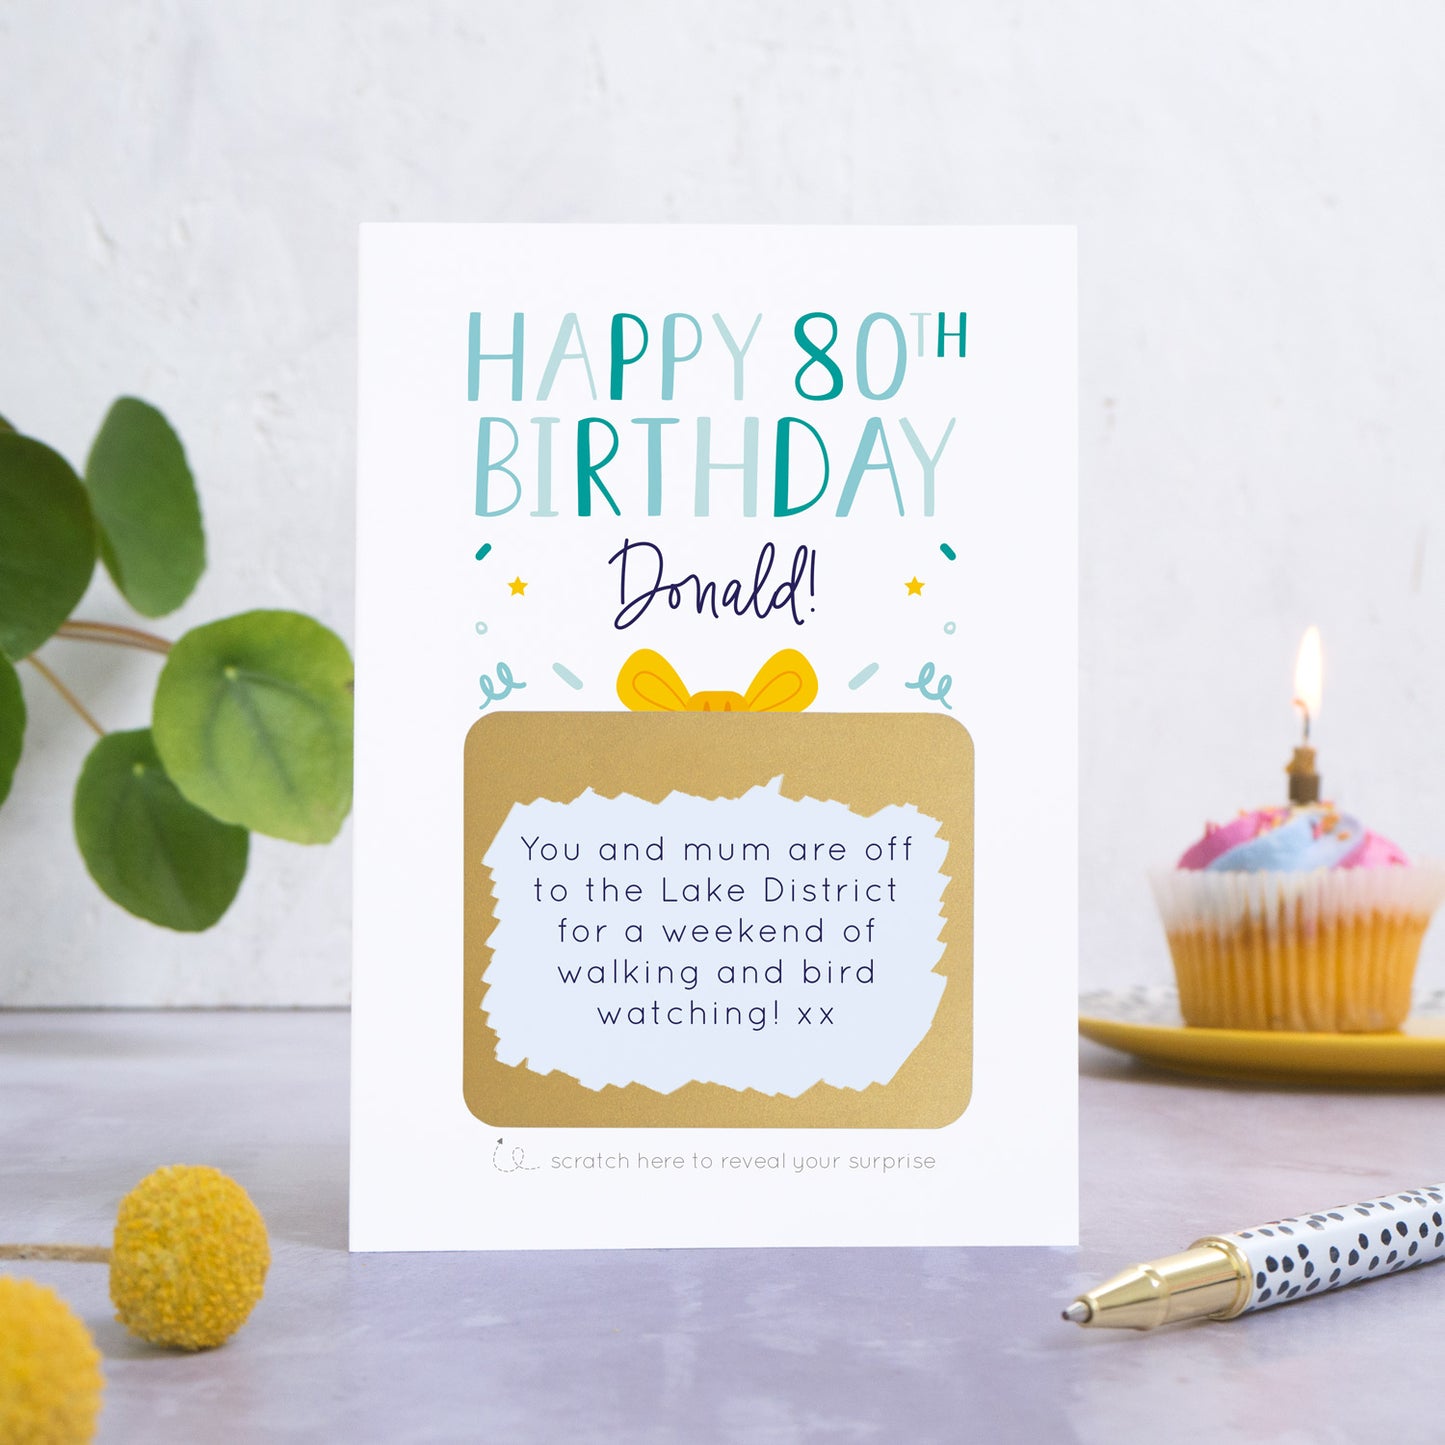 A personalised happy 80th birthday scratch card in blue that has been photographed on a white and grey background. There is foliage and yellow flowers on the left and a cupcake and a pen to the right. The card features the recipients name and a scratch panel that has been scratched off revealing a personalised message.